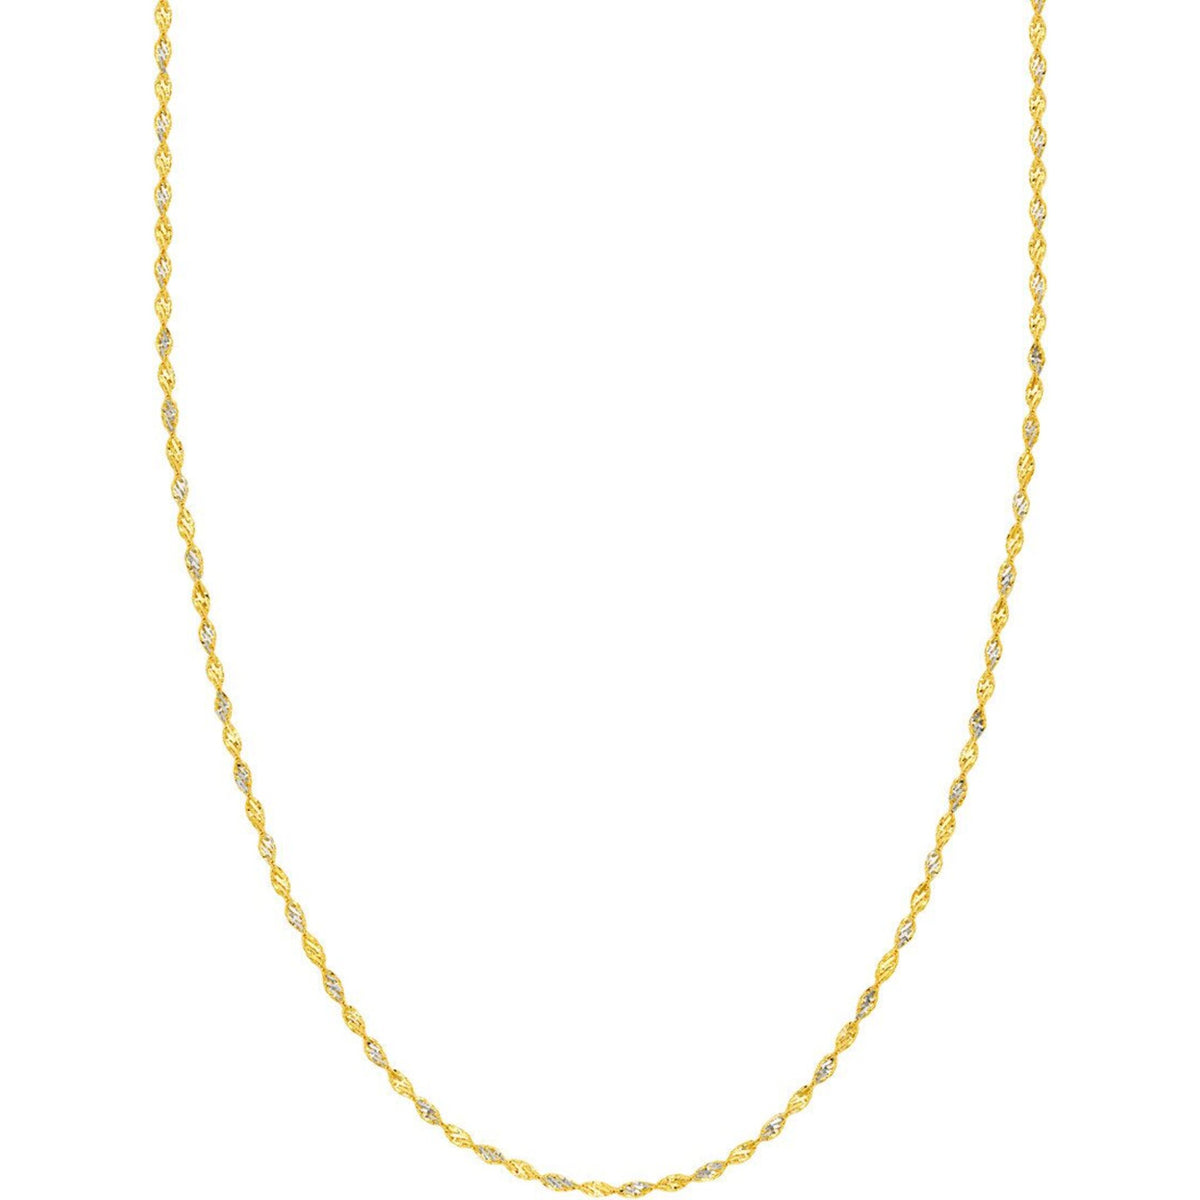 Olas d'Oro 16" Necklace - 14K Yellow/White Gold 2.10mm Yellow/White Dorica Chain with Lobster Lock